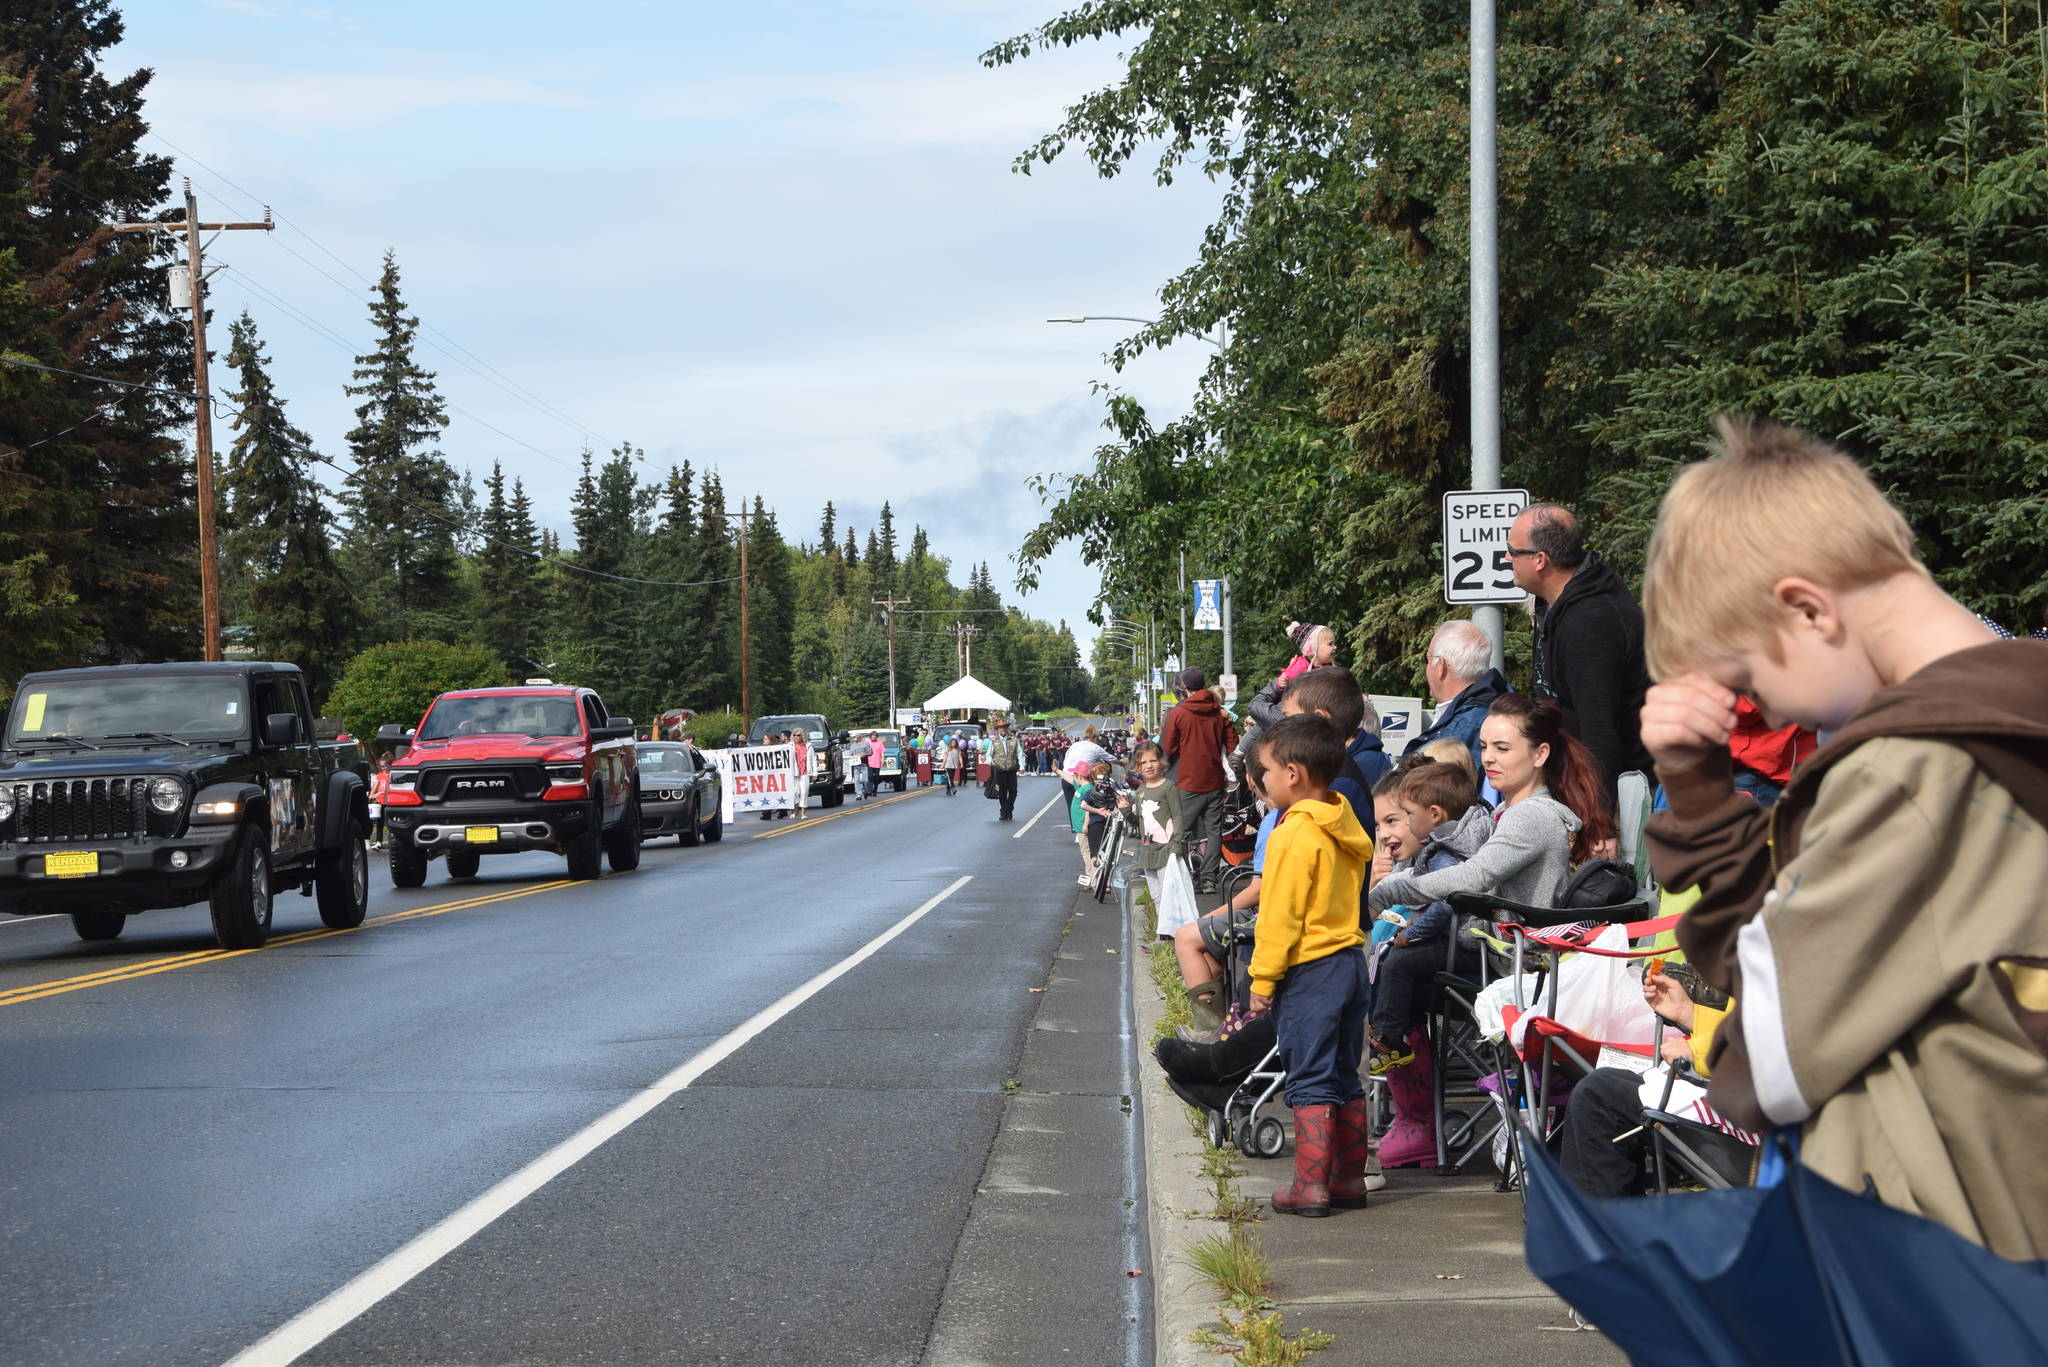 Onlookers await the passing of parade floats at the Progress Days Parade in Soldotna on July 27, 2019. (Photo by Brian Mazurek/Peninsula Clarion)